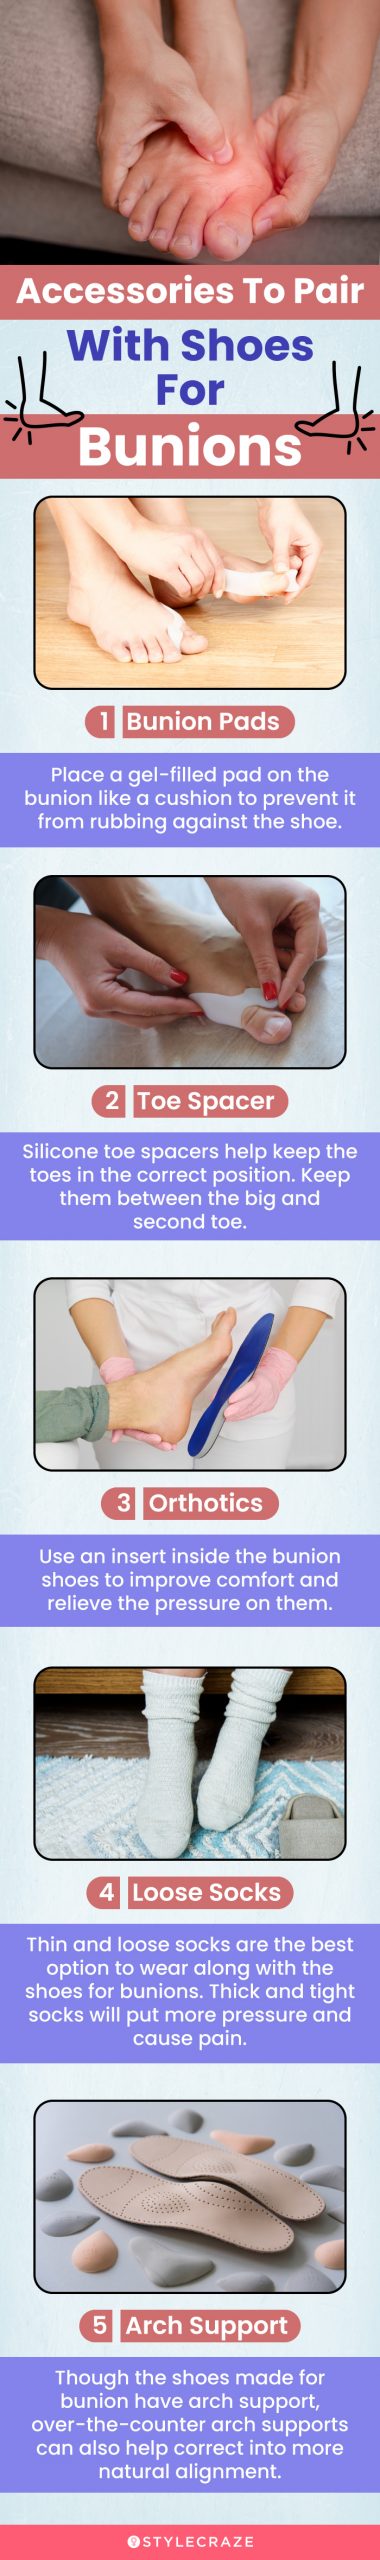 Accessories To Pair With The Shoes For Bunions (infographic)